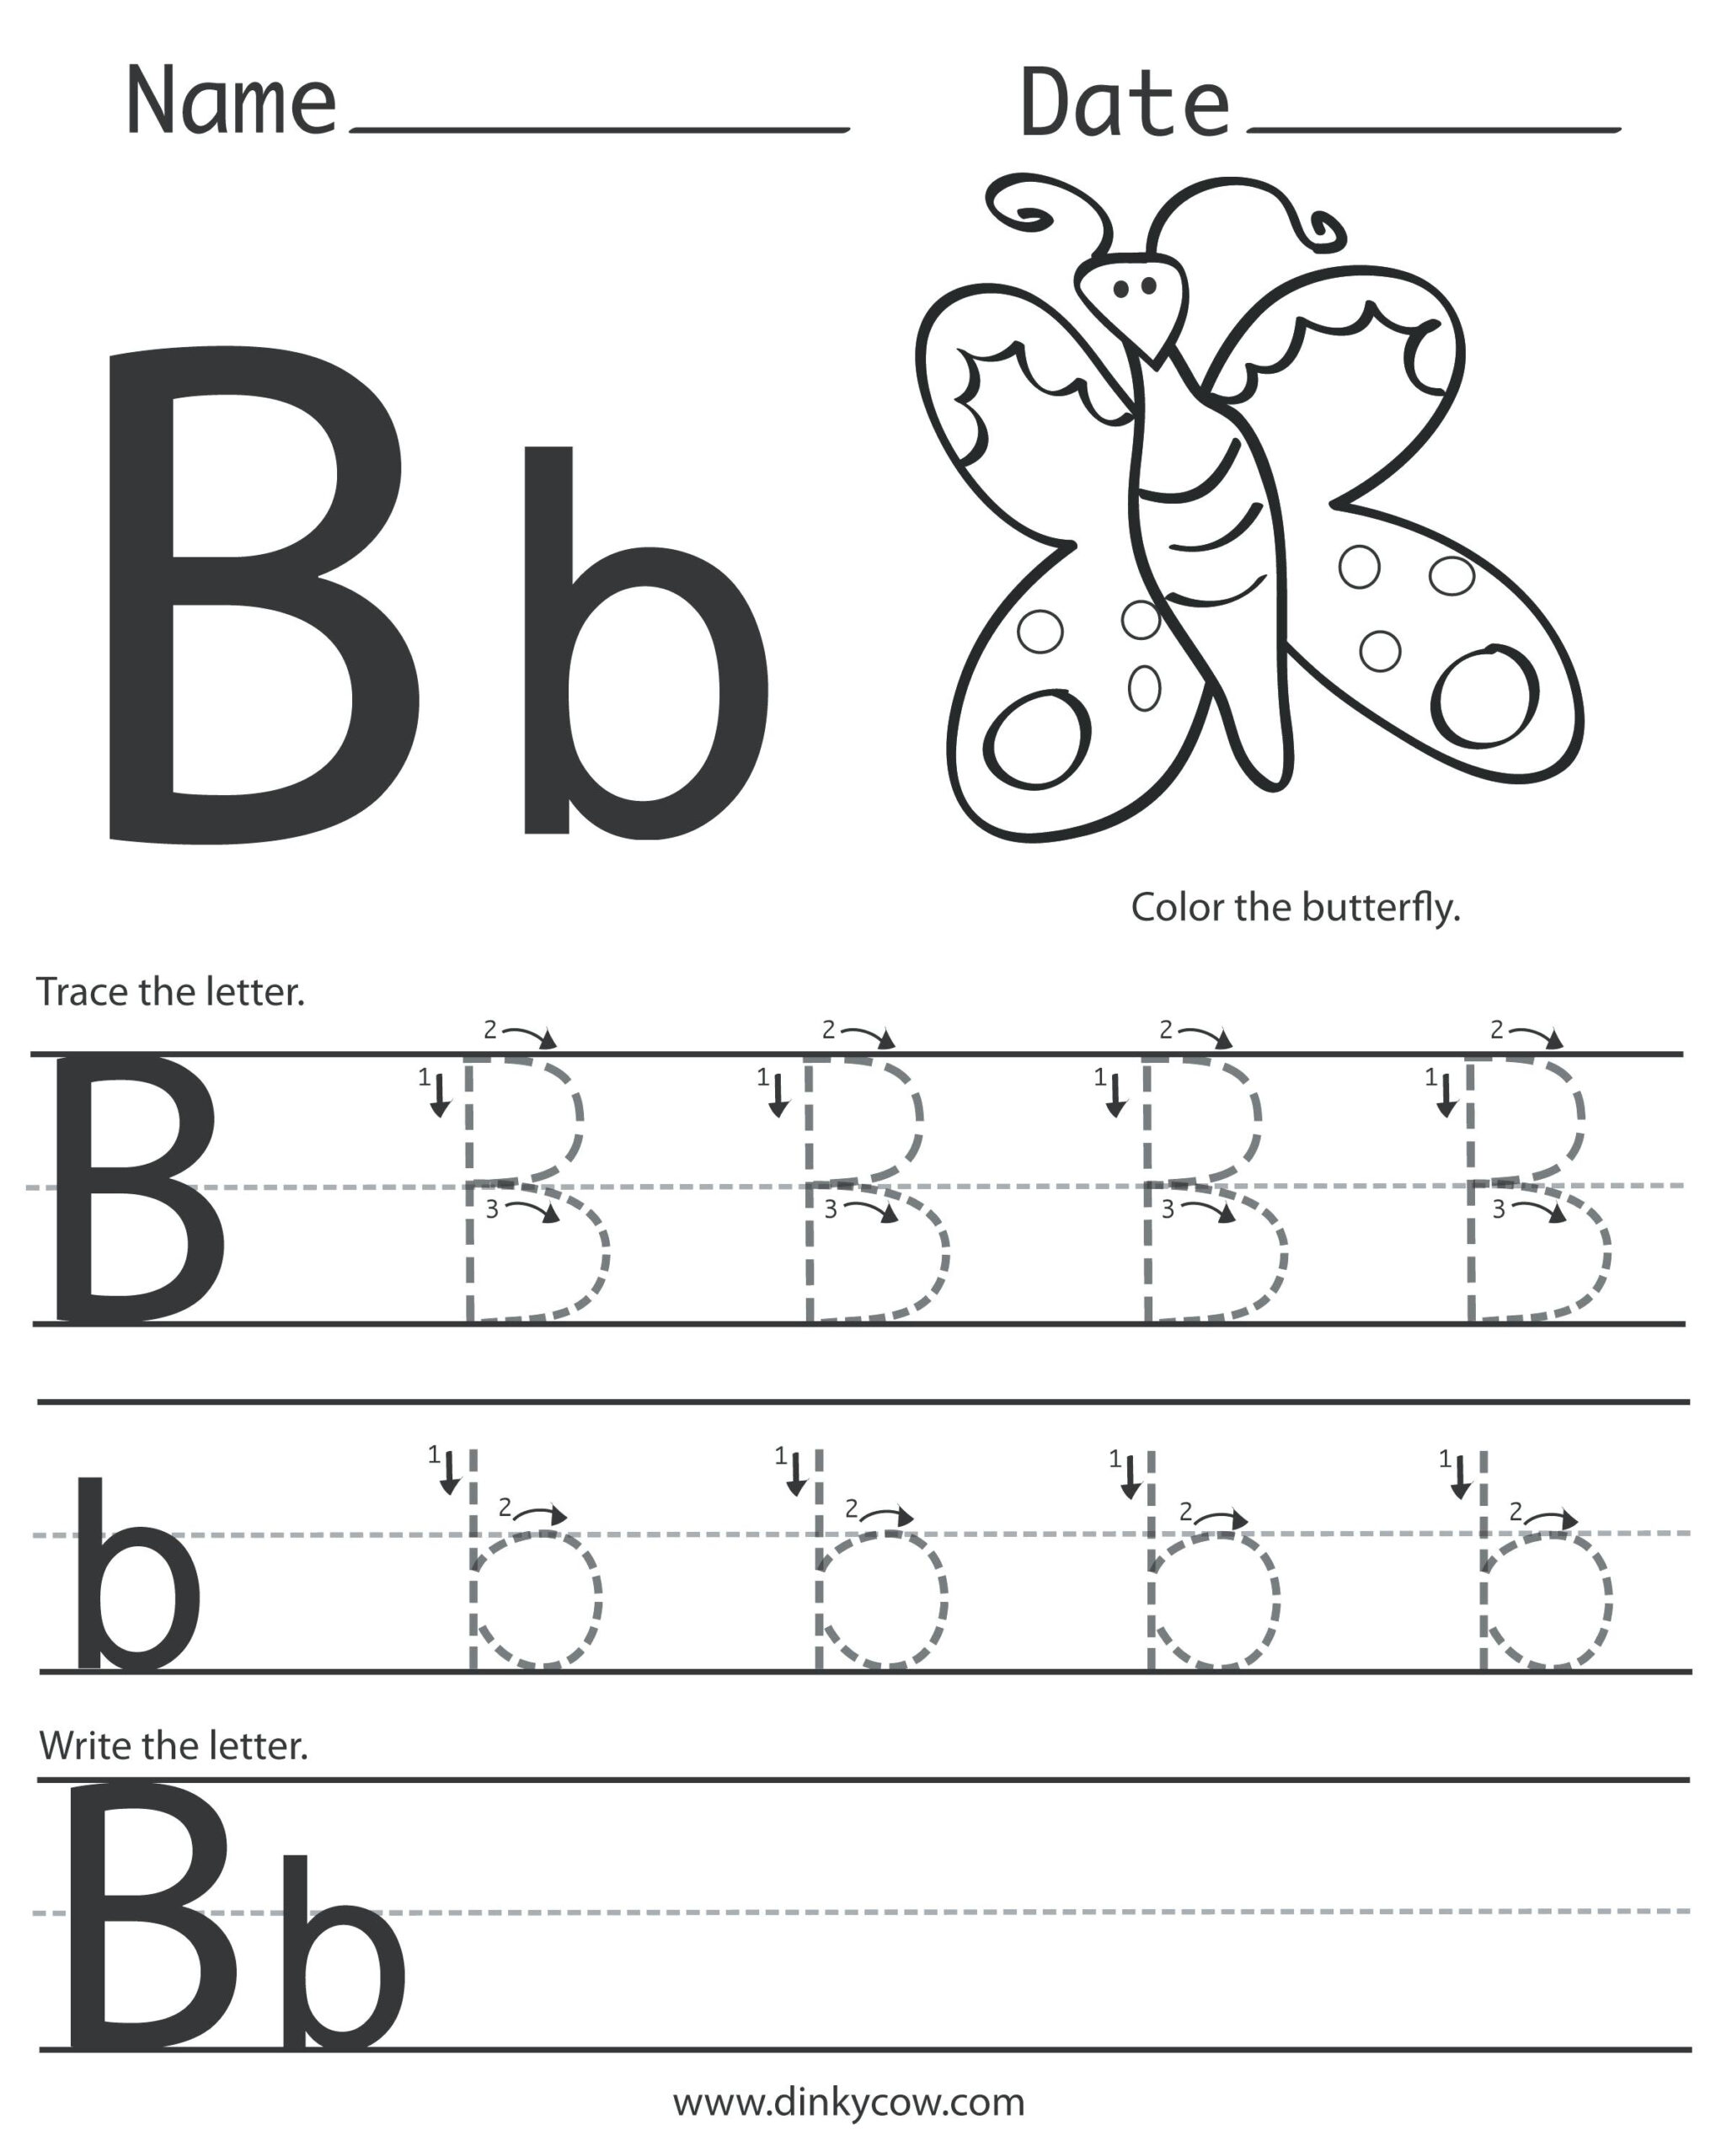 Letter B Preschool Check Out This Amazing Collection Of Art throughout Letter B Tracing Sheet